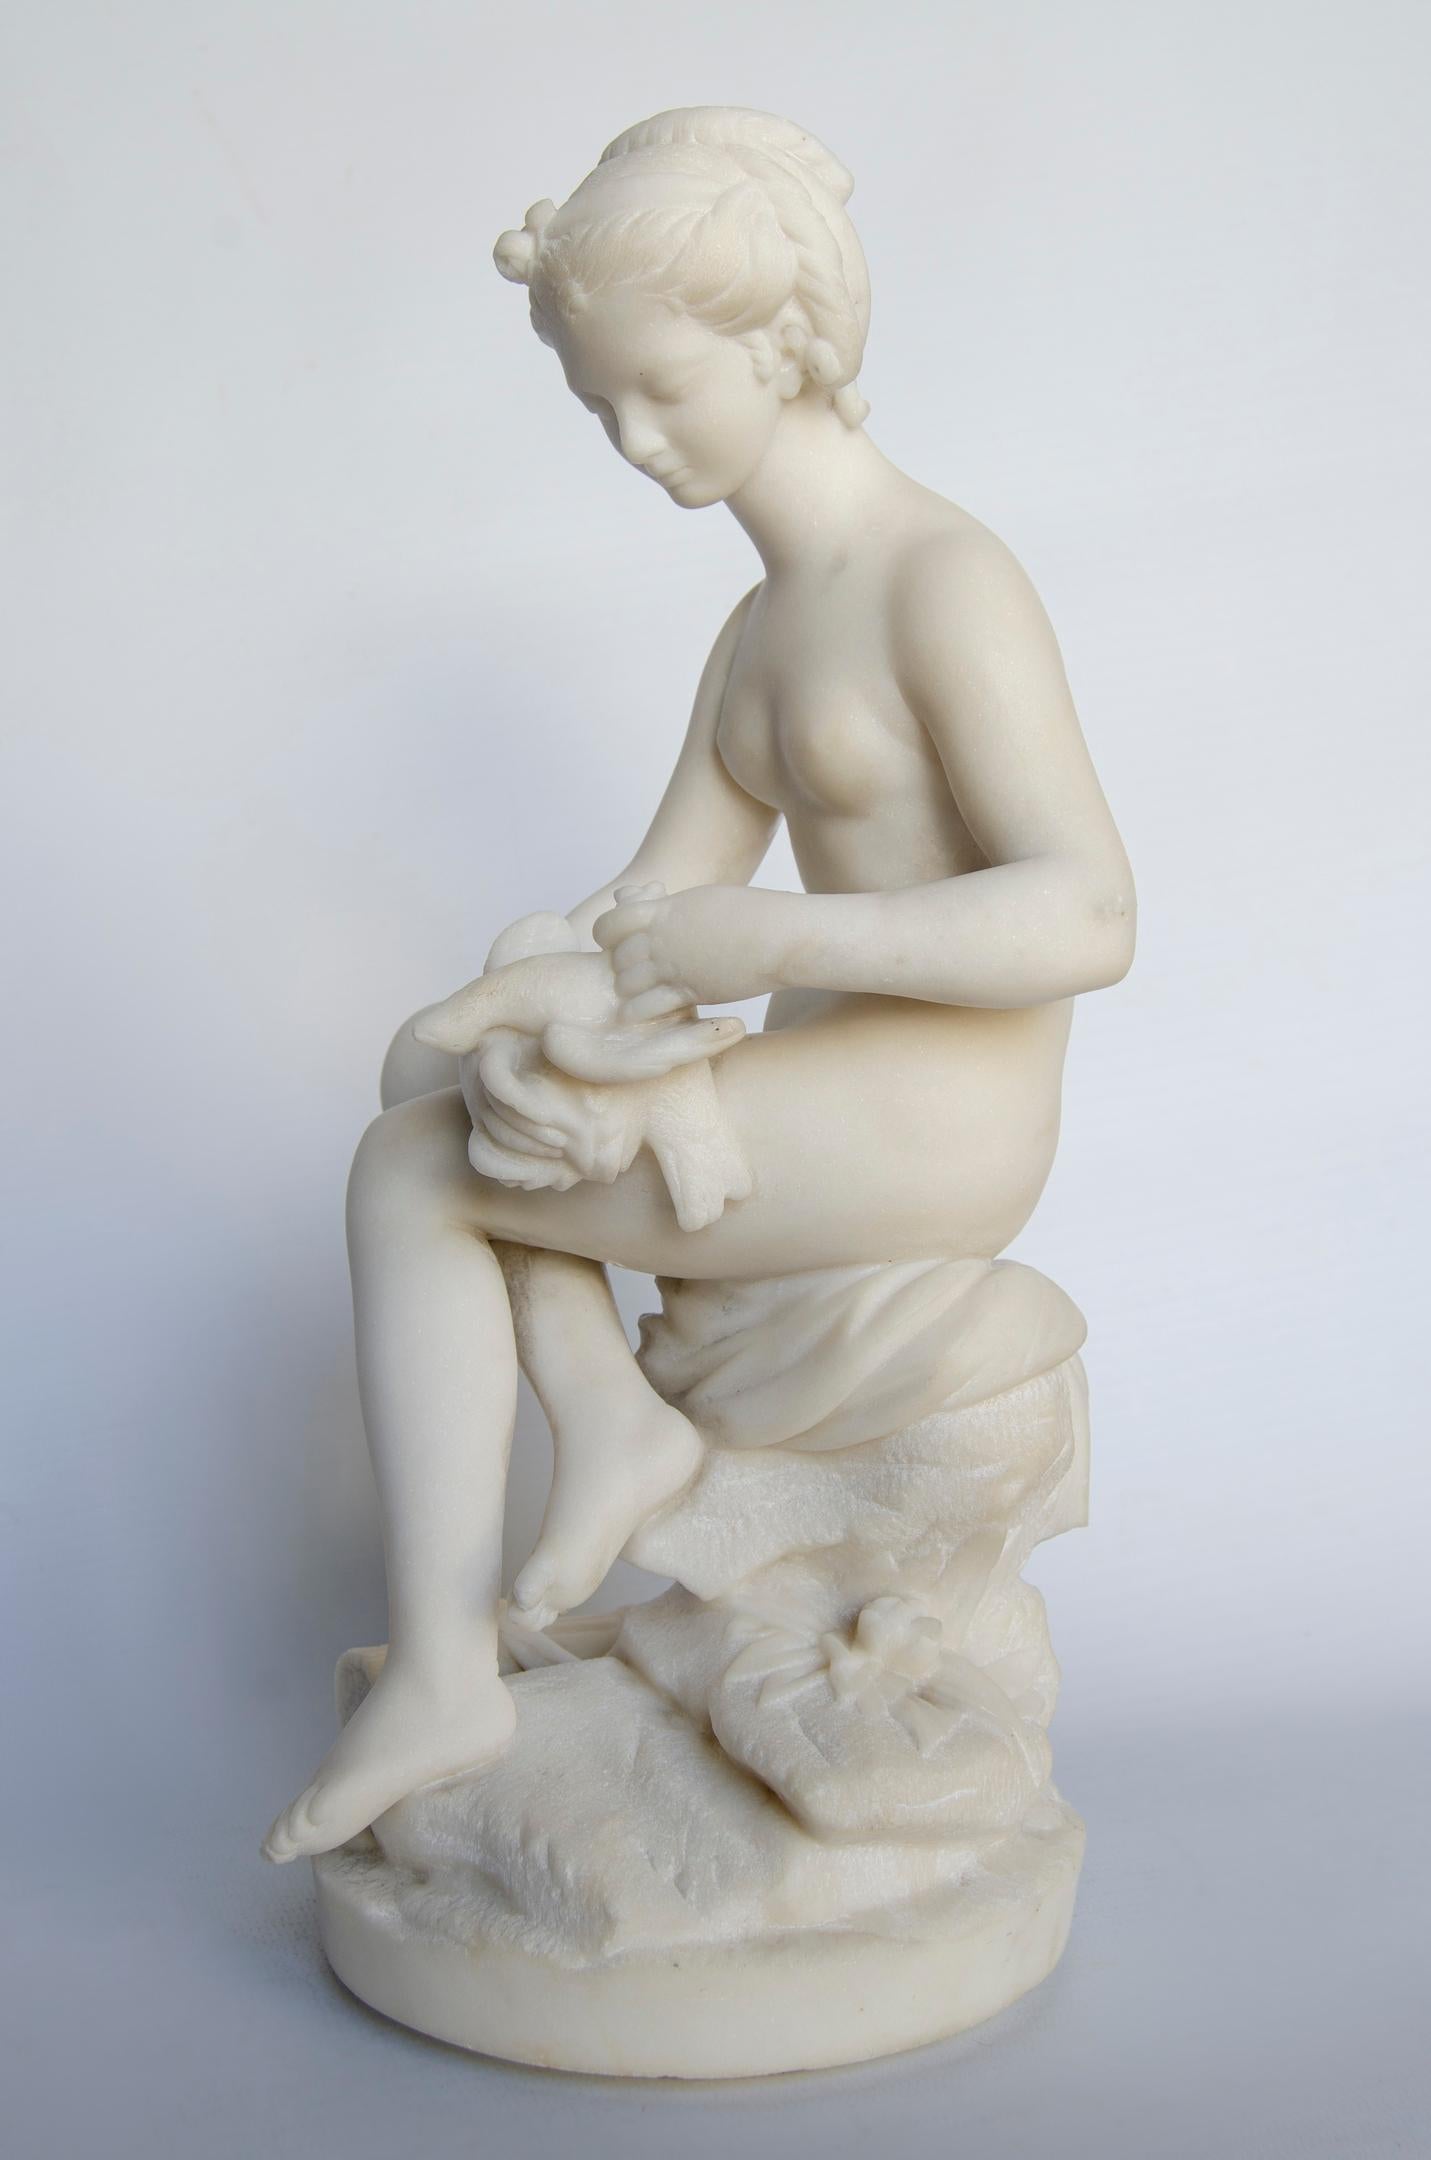 Sculpture (Diana the huntress) marble
marble material
origin Italy without signature
perfect condition without restoring.